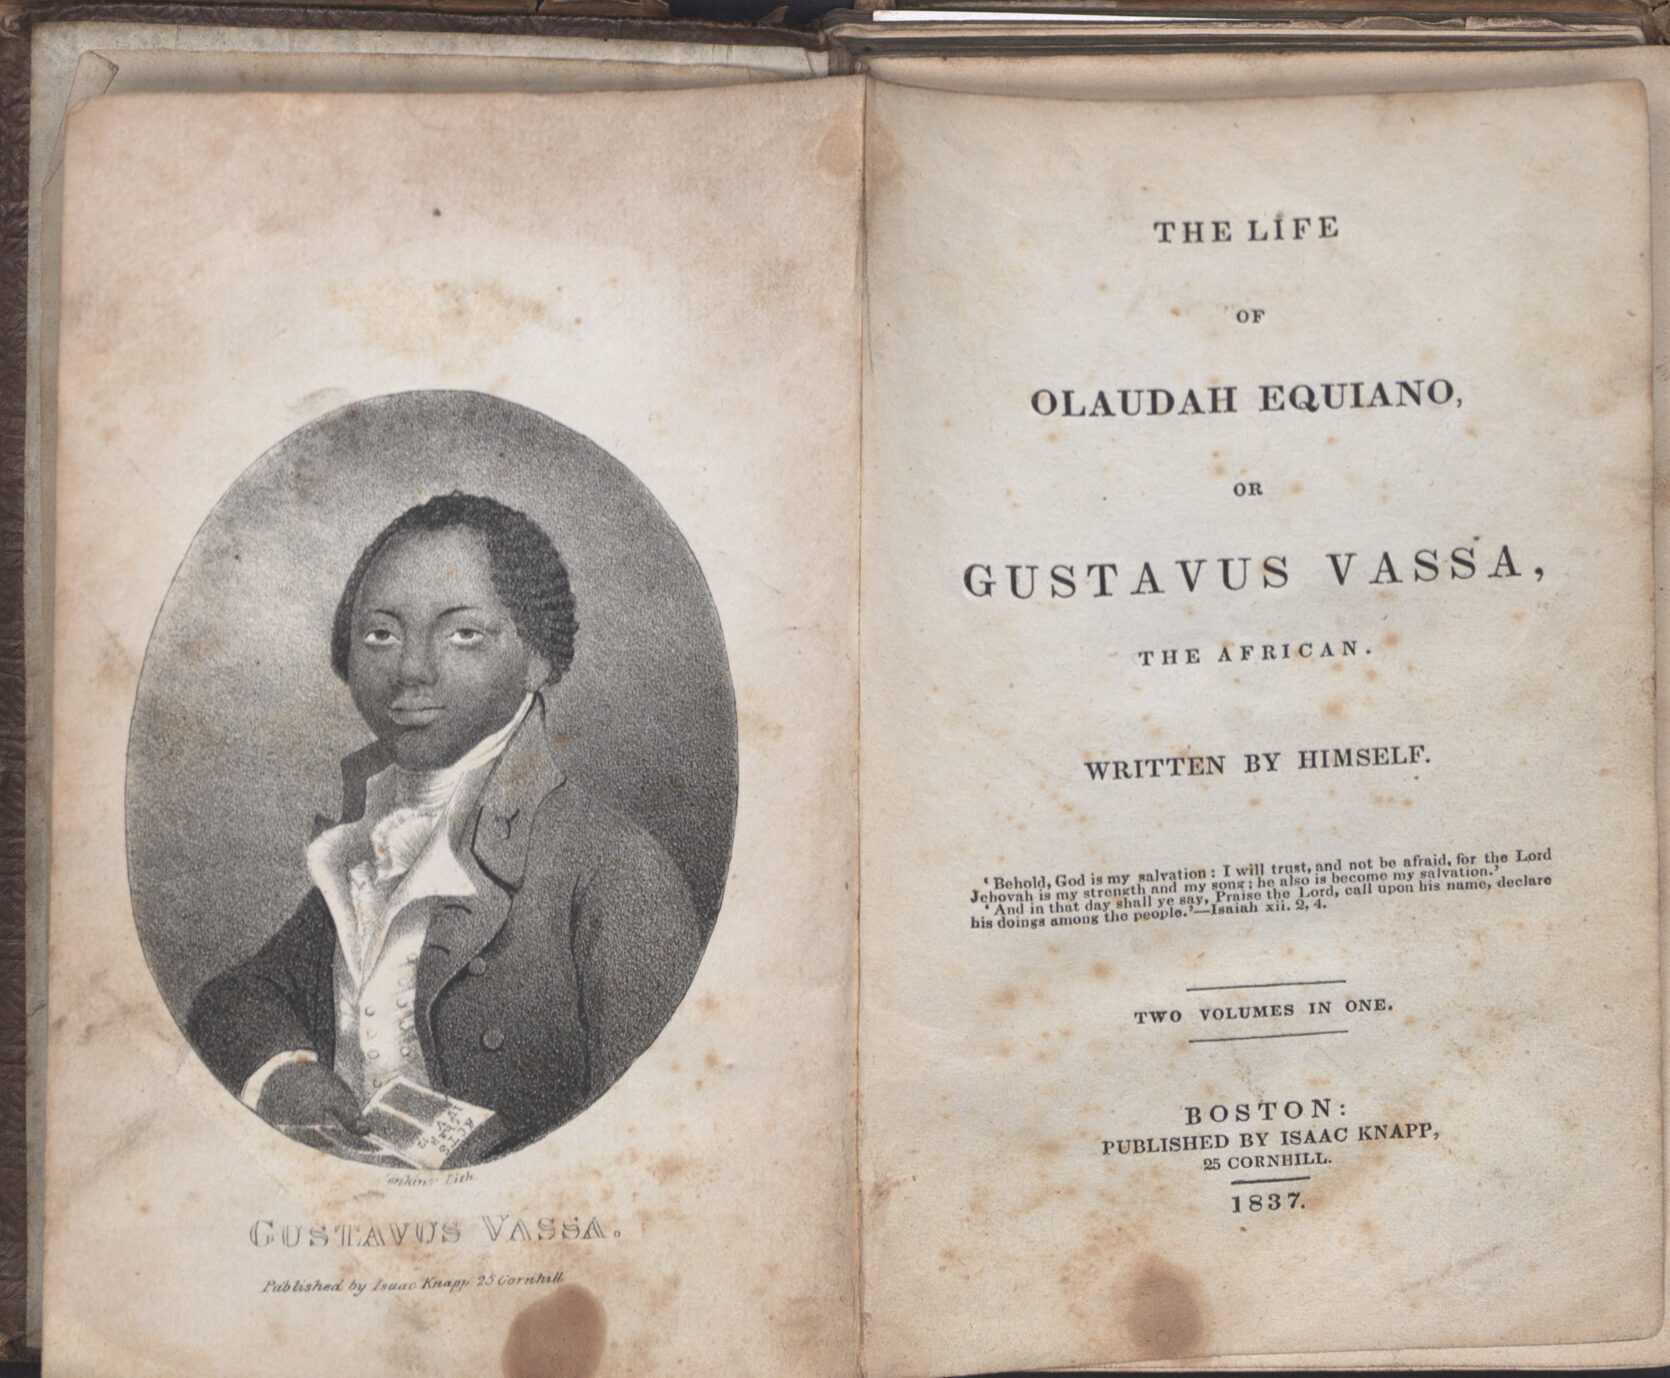 Image of the cover page of the book 'The Interesting Narrative of the Life of Olaudah Equiano, or Gustavus Vassa, the African'